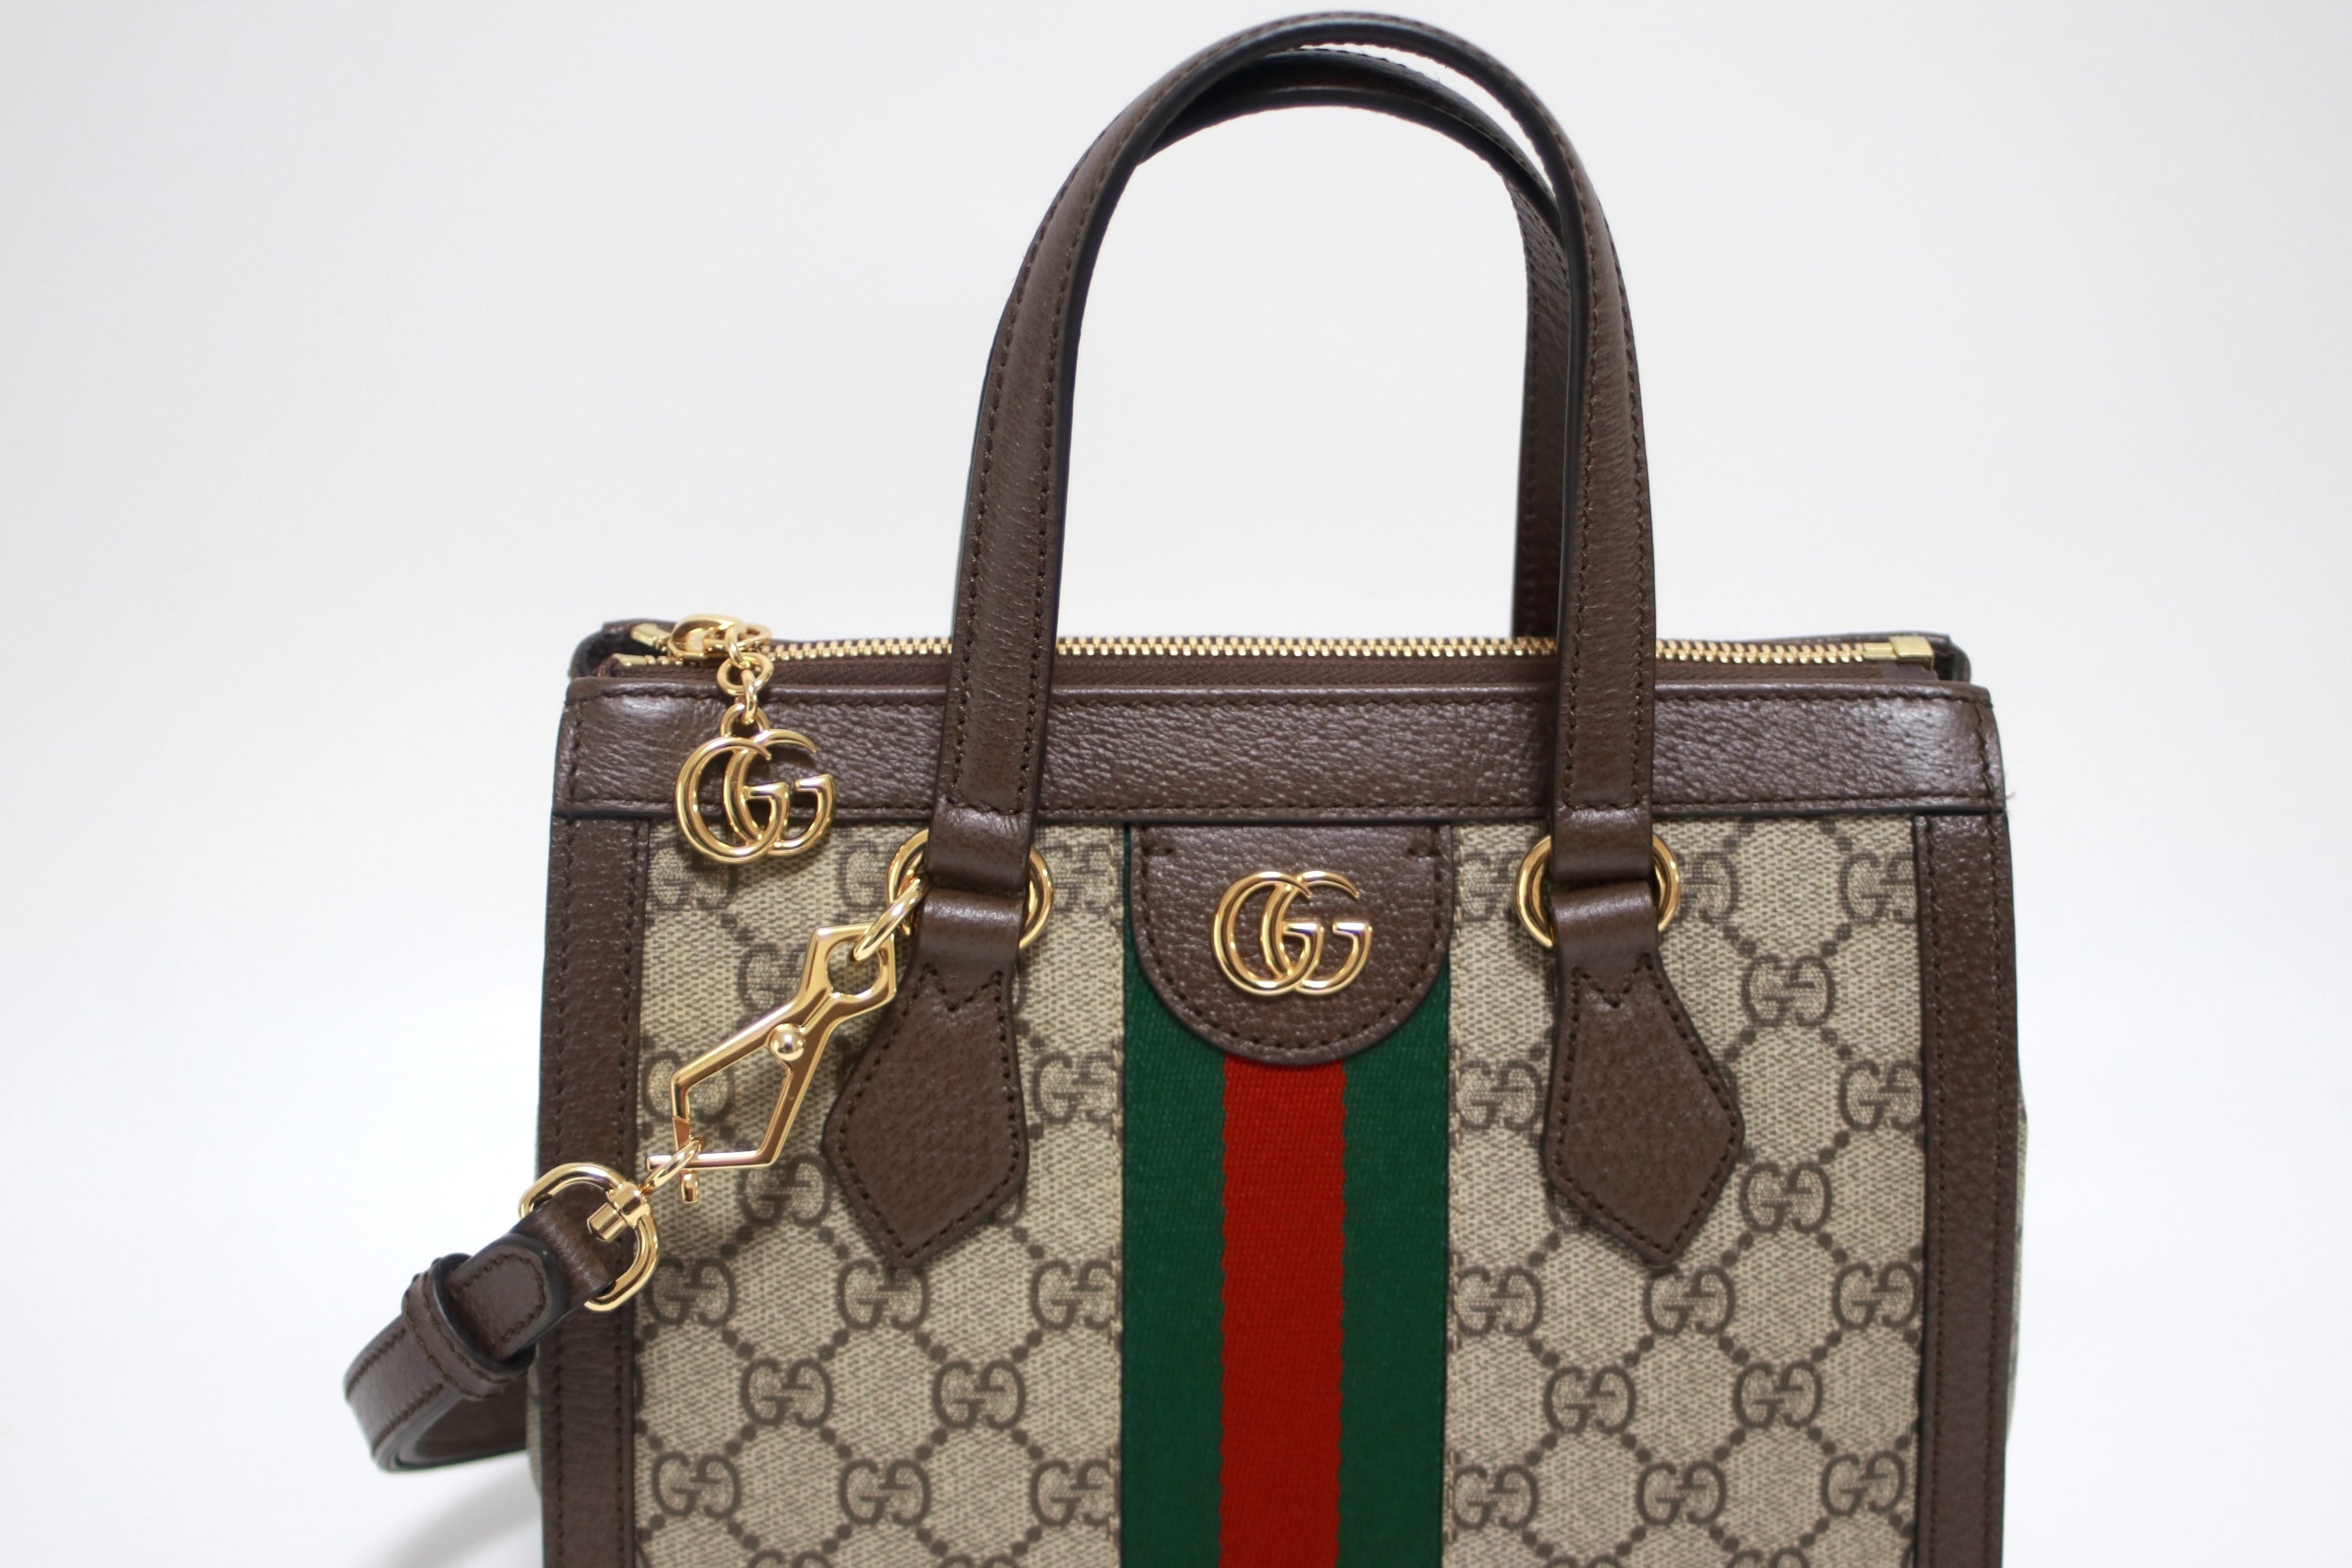 Gucci Ophidia Small Tote Bag Used (8682)